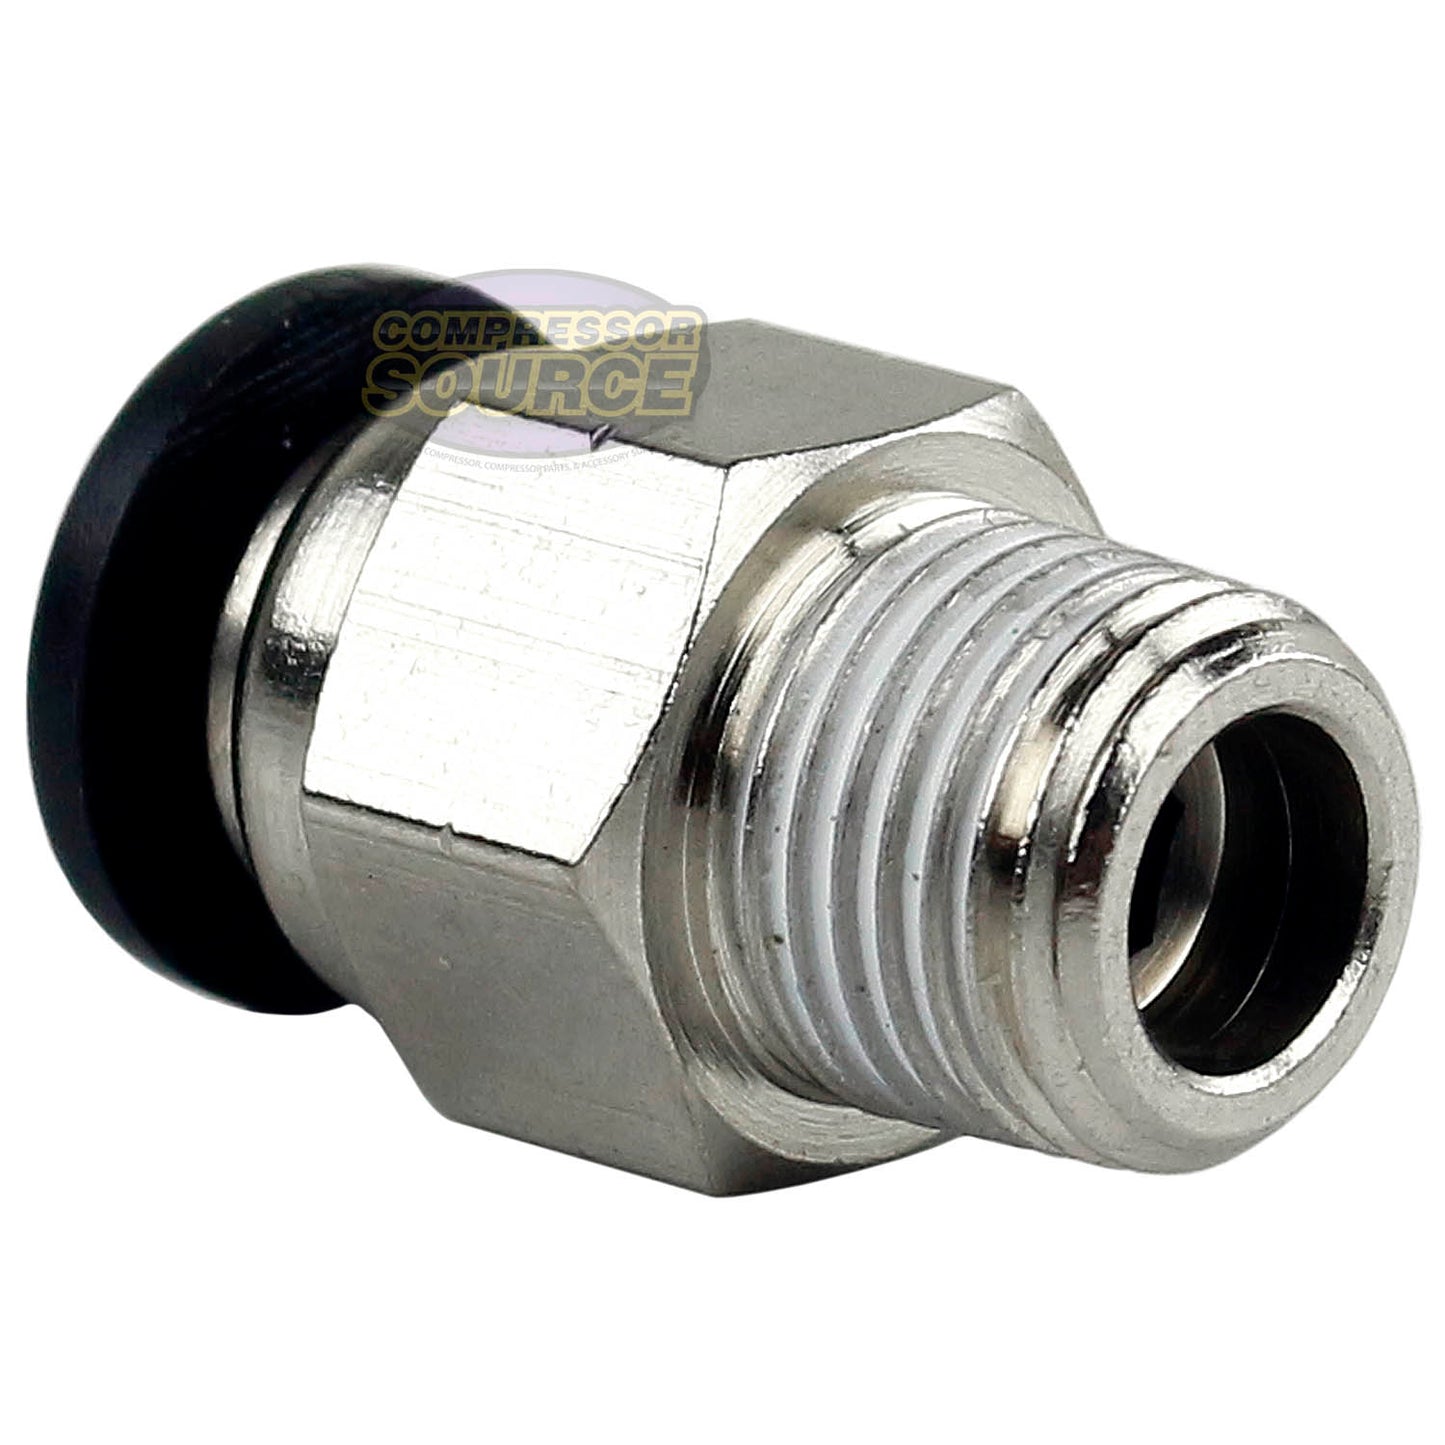 5 Pack 1/8" Male NPT x 1/4 OD Tube Female Push In To Lock Connect Straight Fitting Prevost RPDMR4120